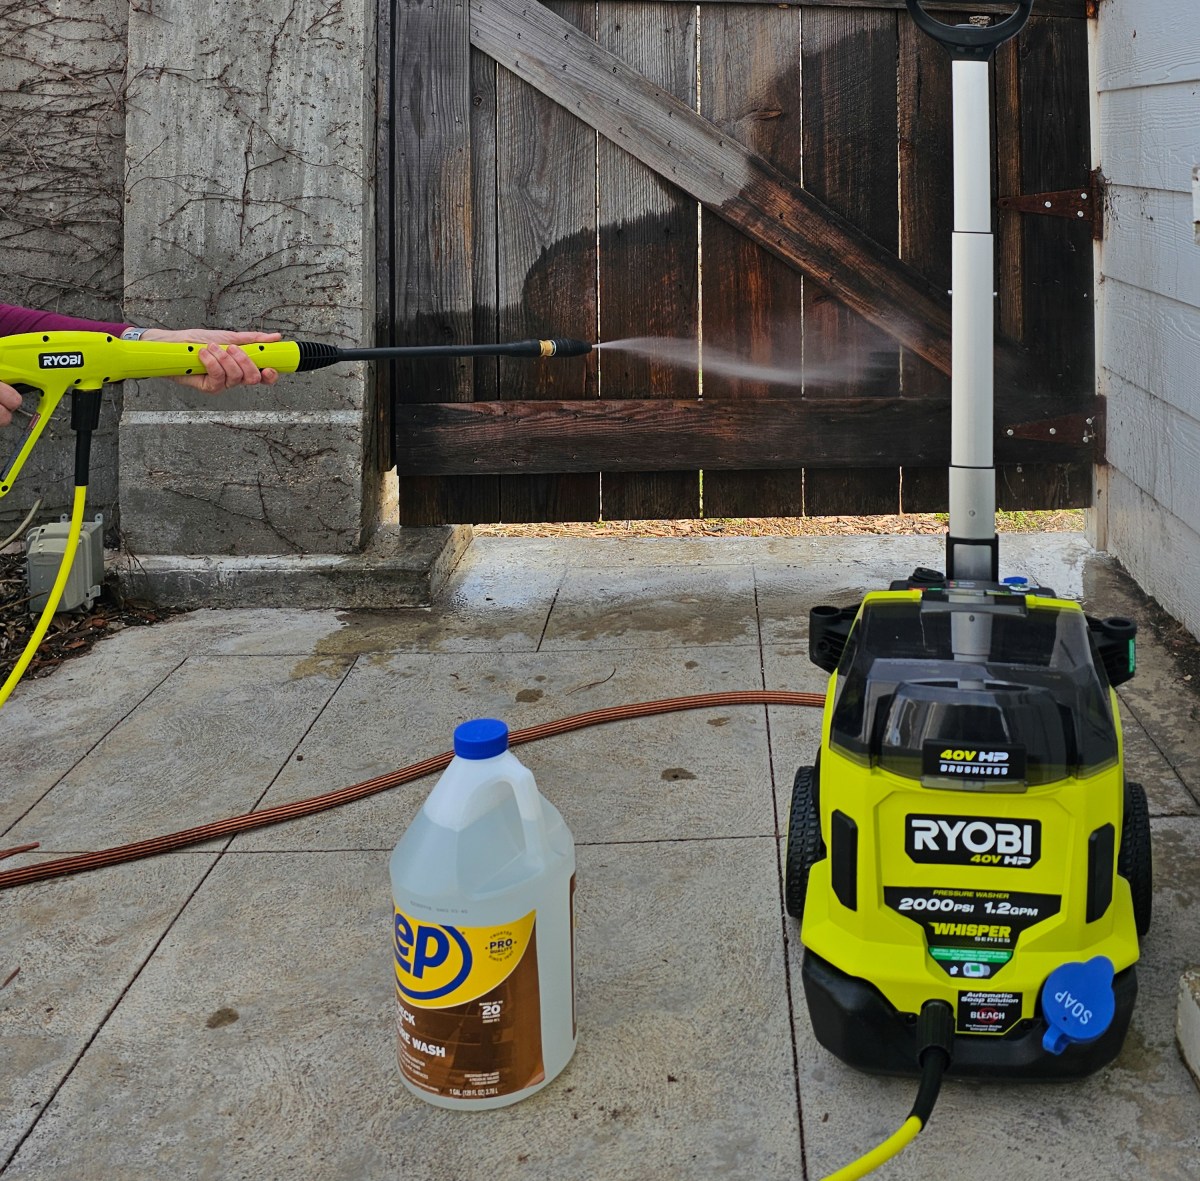 Someone using the Ryobi 2,000 PSI 1.2 GPM Electric Pressure Washer to clean a fence during testing.